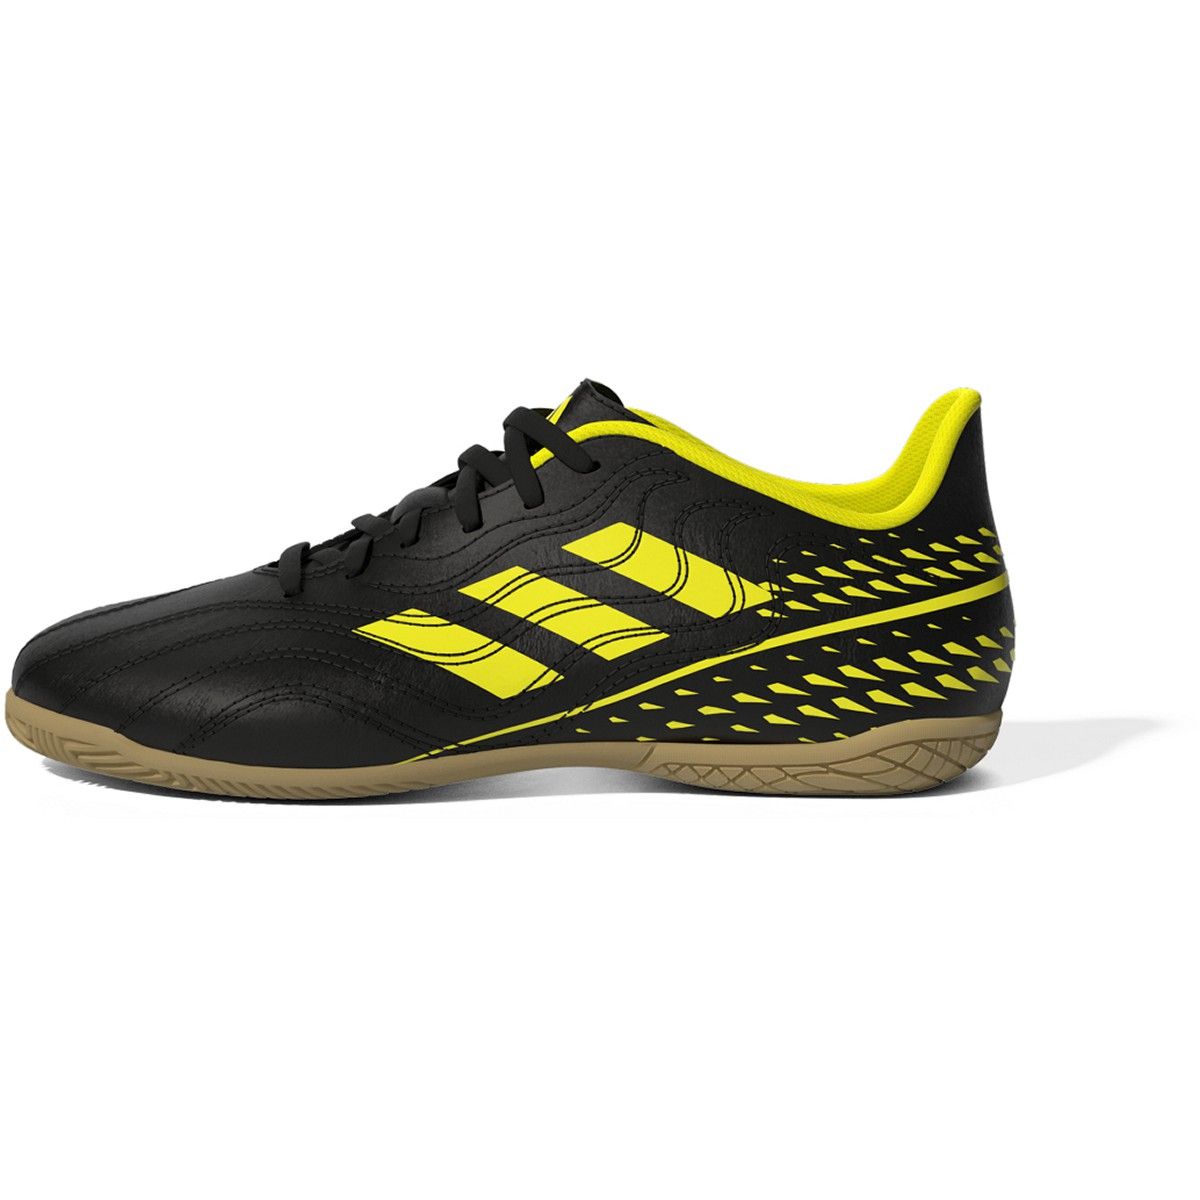 adidas Copa Sense.4 Kids Indoor Soccer Shoes in Black and 